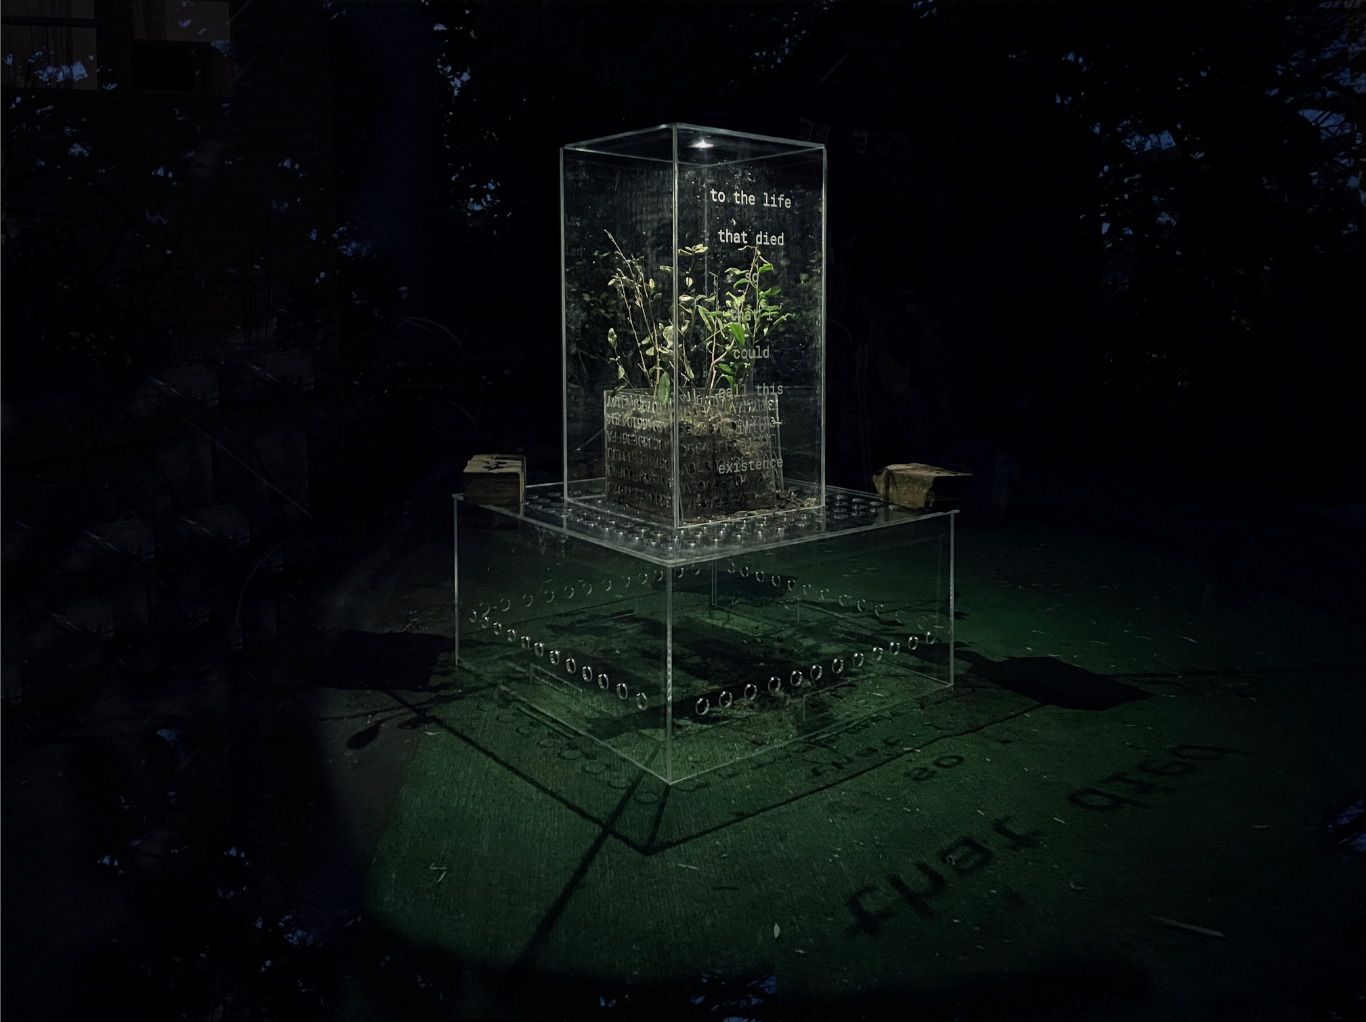 an acrylic sculpture sits on a green surface on a black, shadowy background. There are words inscribed on the face of the sculpture that say 'to the life that died so that I could call this into existence'